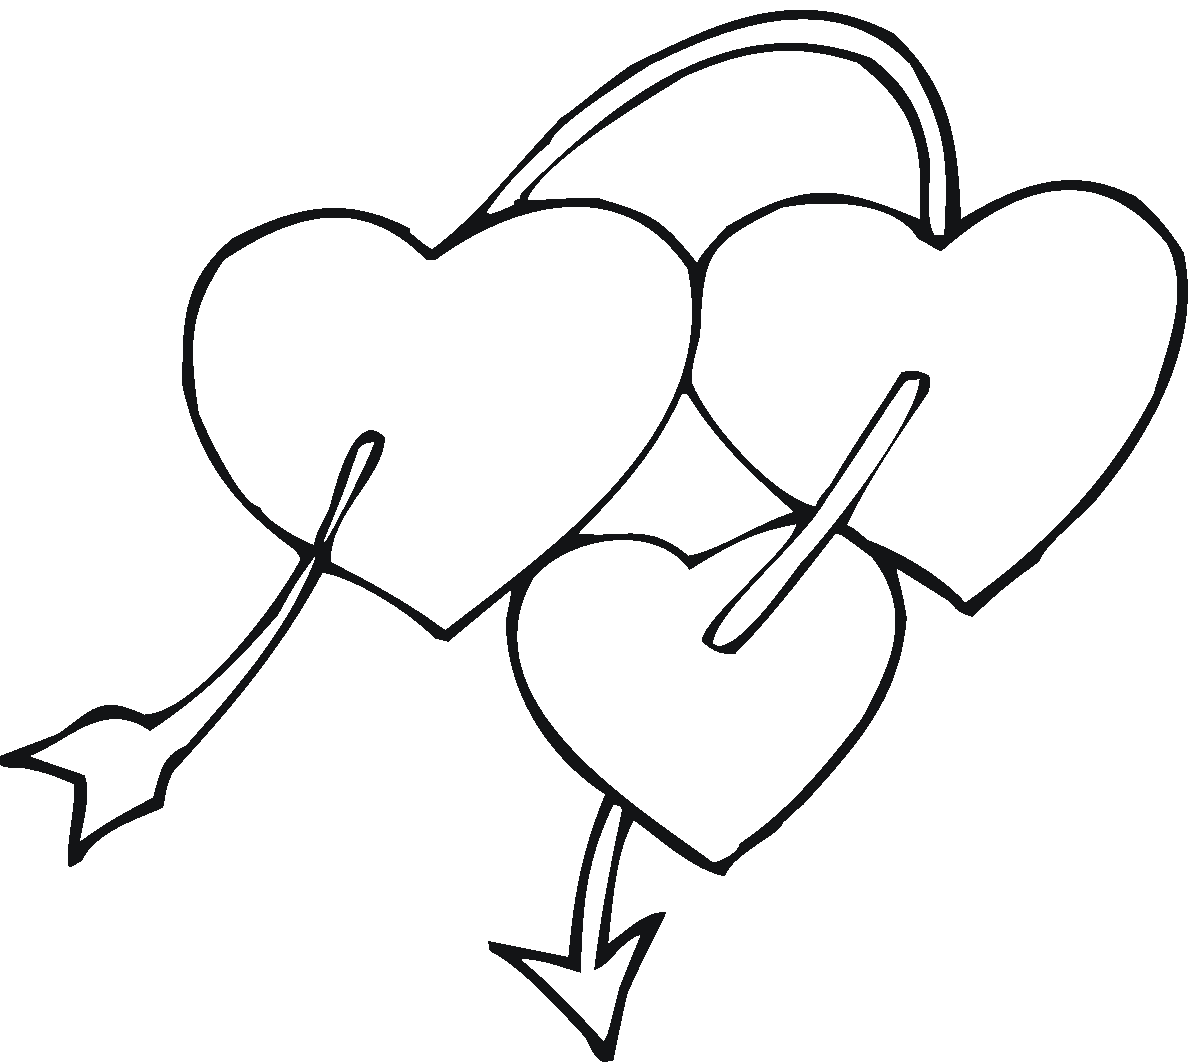 Hearts Love Drawings - ClipArt Best